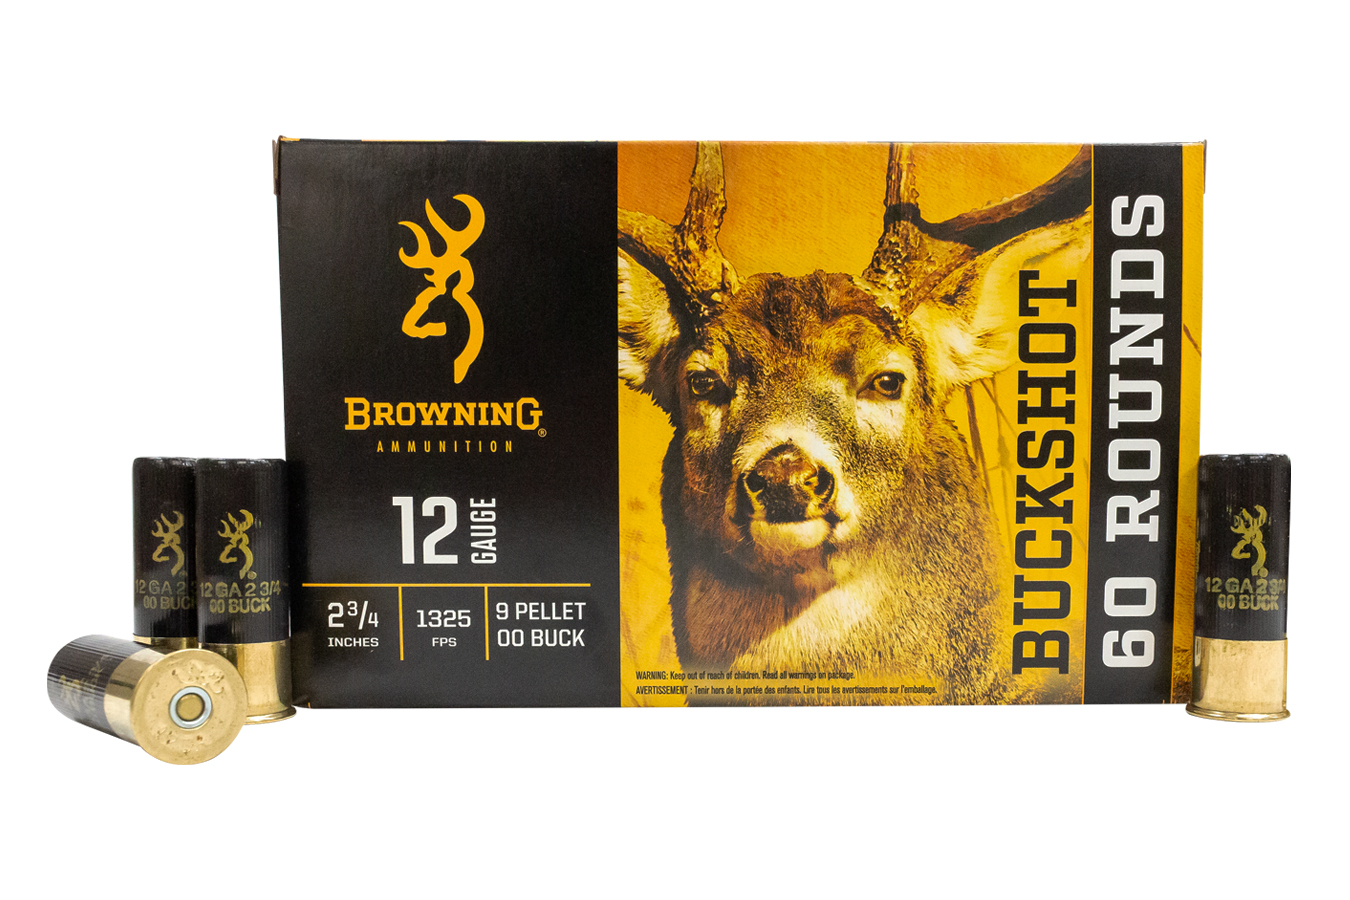 BROWNING AMMUNITION 12 GA 2-3/4 IN 00 BUCK 60 RD VALUE PACK